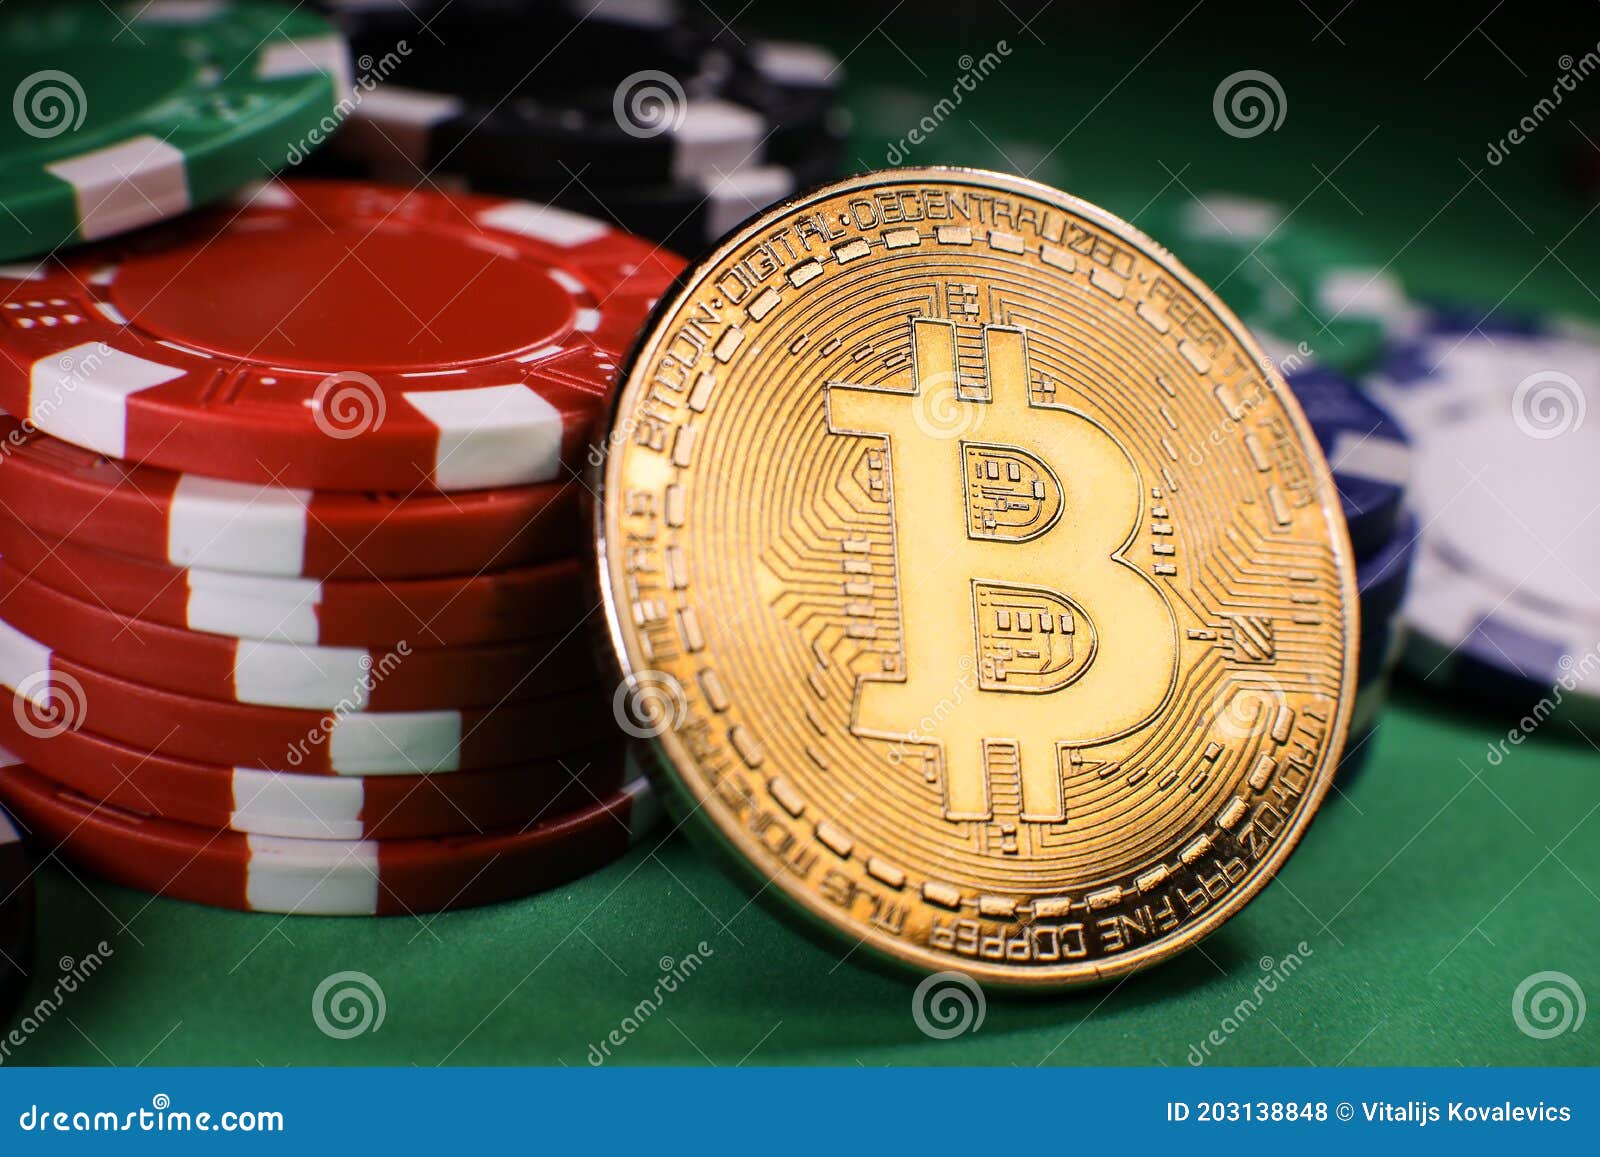 10 Best Practices For Bitcoin Casino India